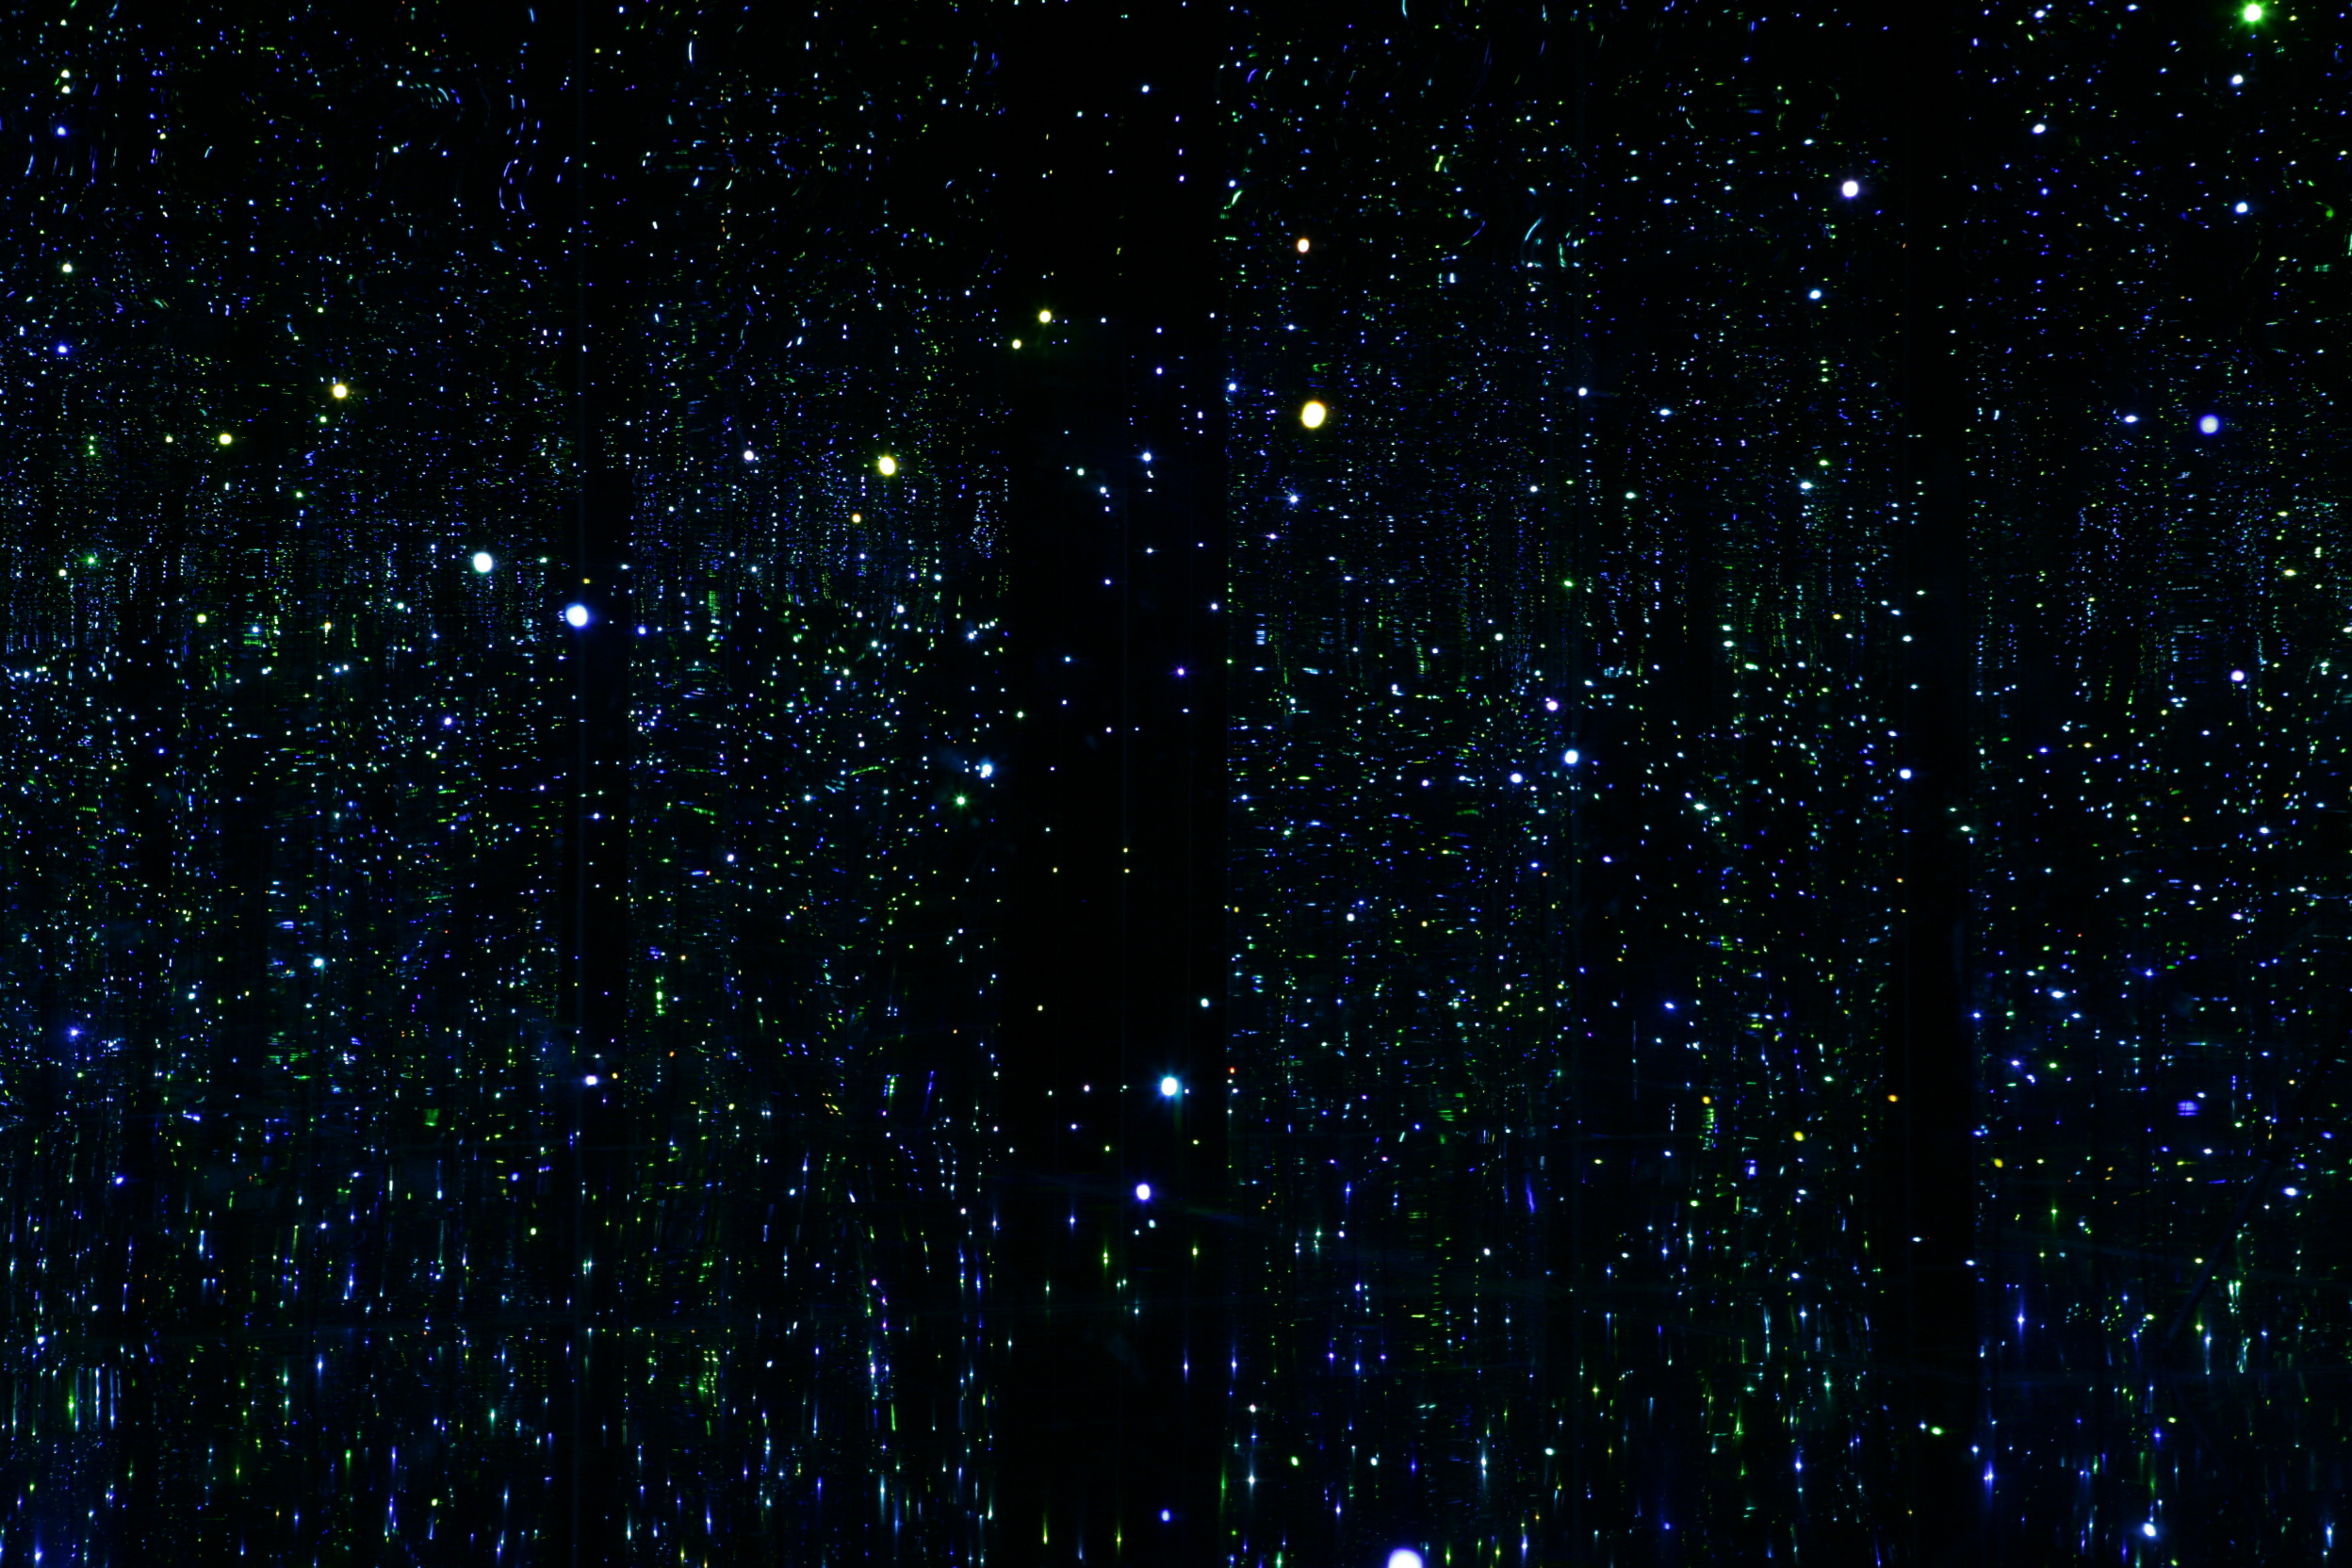 Yayoi Kusama, You Who are Getting Obliterated in the Dancing Swarm of Fireflies (Tú que estás siendo obliterado por una multitud de luciérnagas danzantes), 2005, mixed media installation with LED lights, Museum purchase with funds provided by Jan and Howard Hendler.